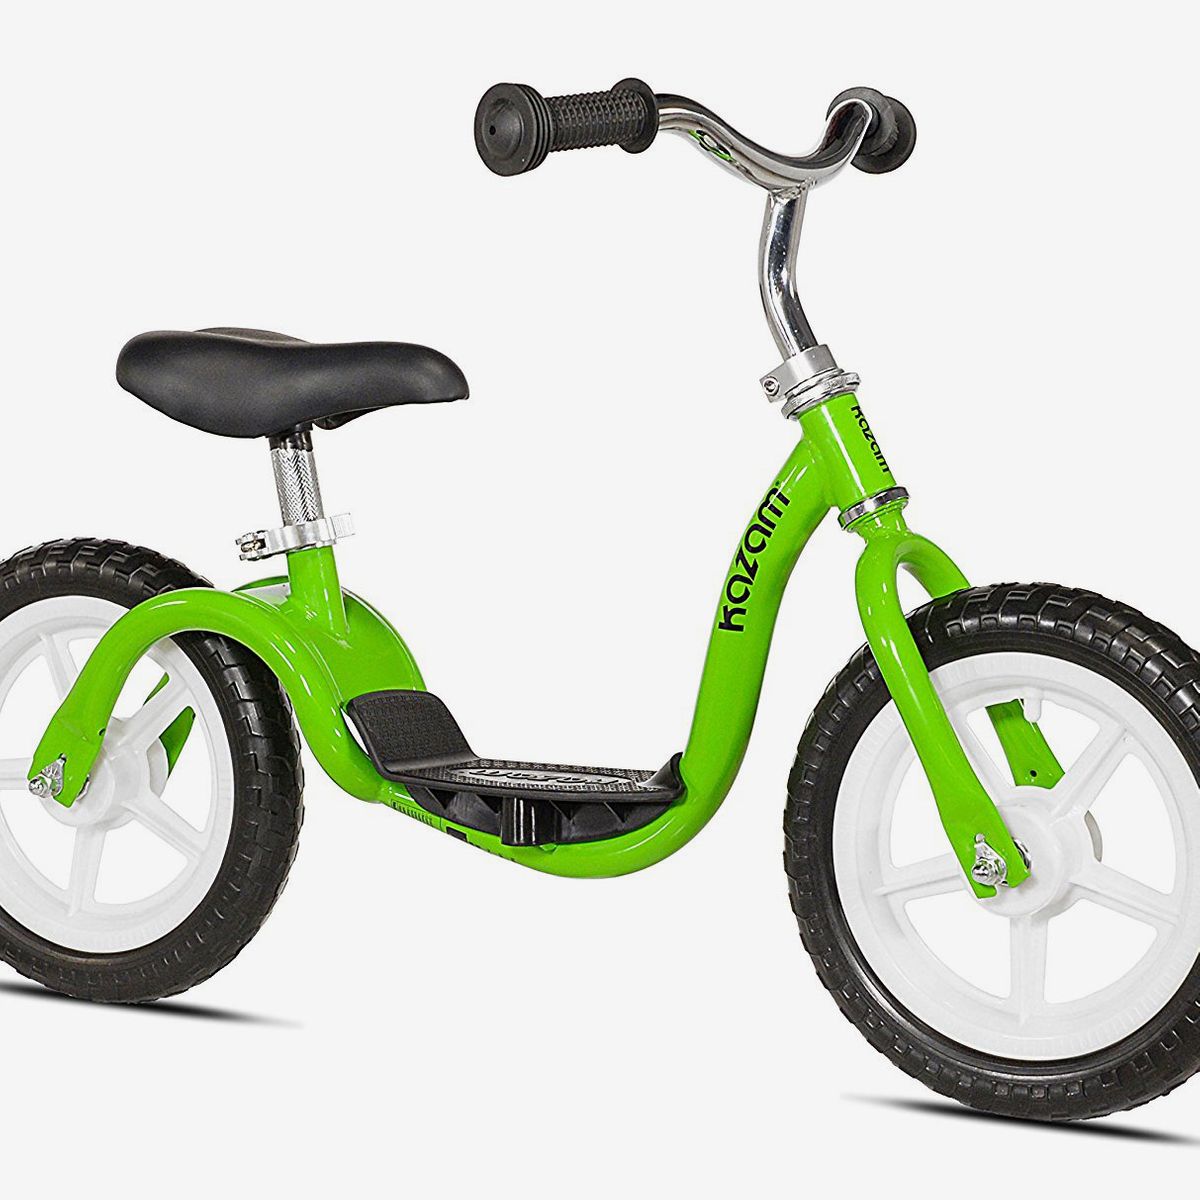 baby bike for 5 year old price